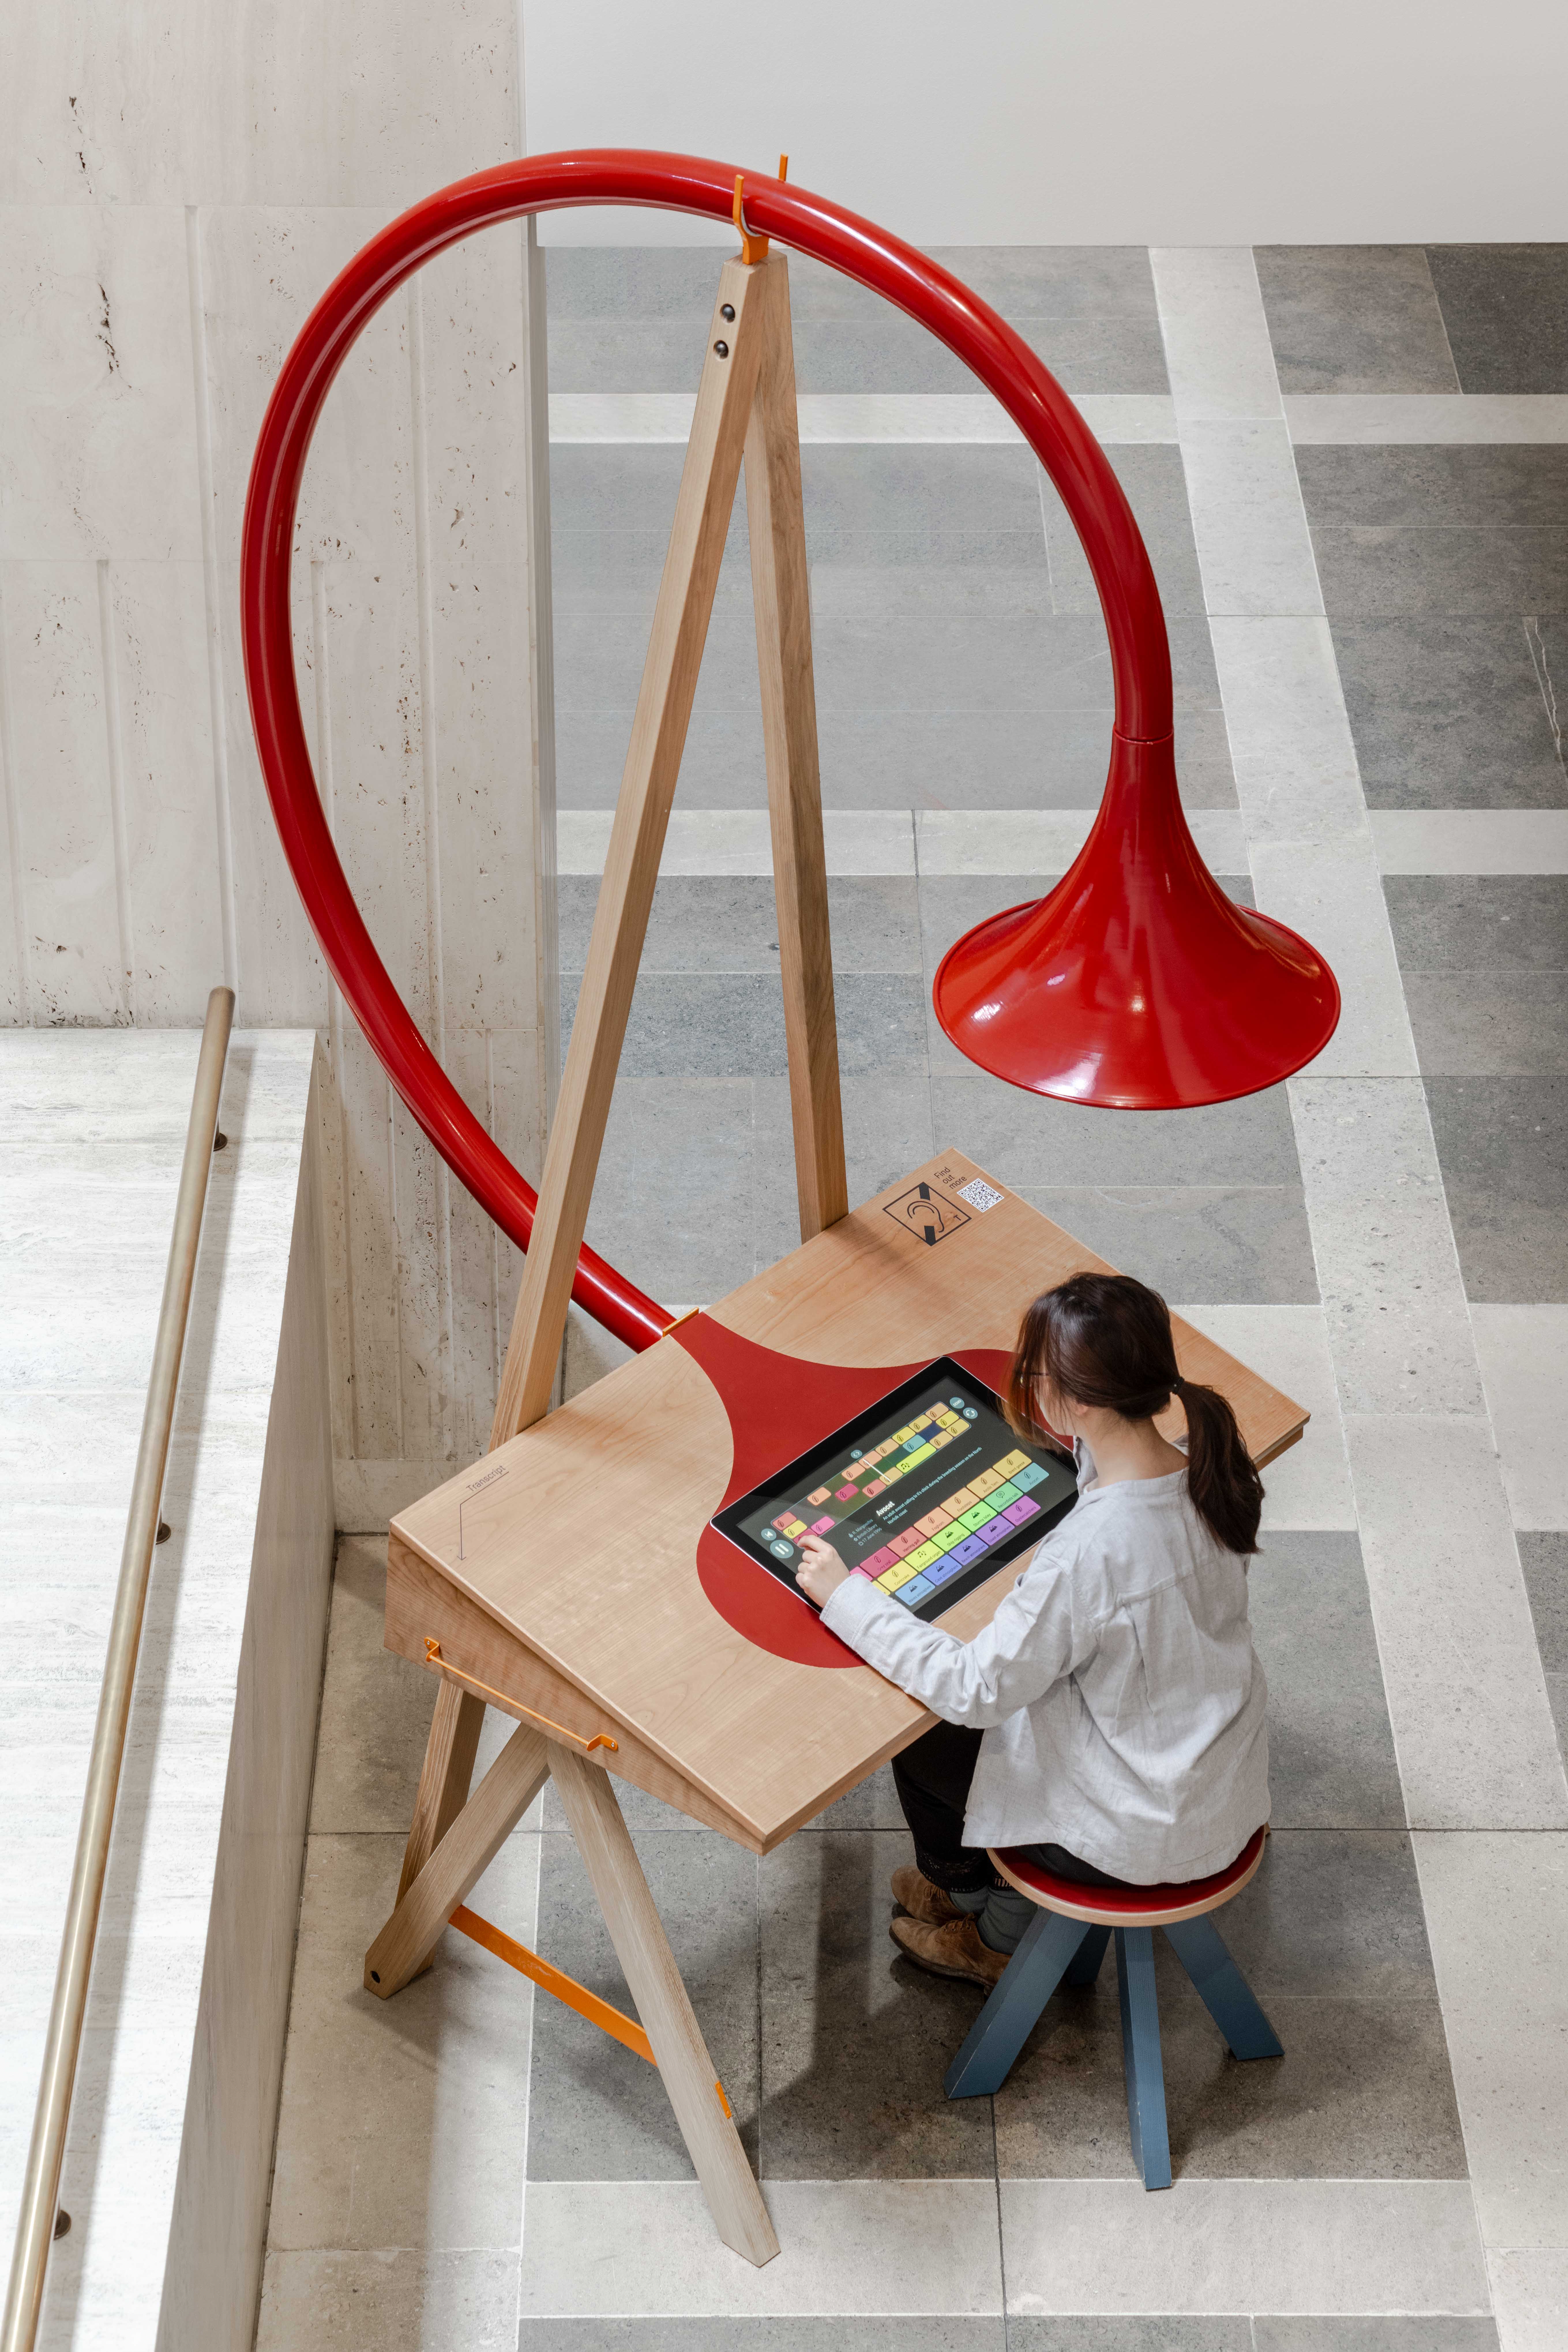 Image of Emily Peasgood's Listening Desk in The British Library. A young woman is sat at the desk, playing with the interactive screen. A large horn is above her head.